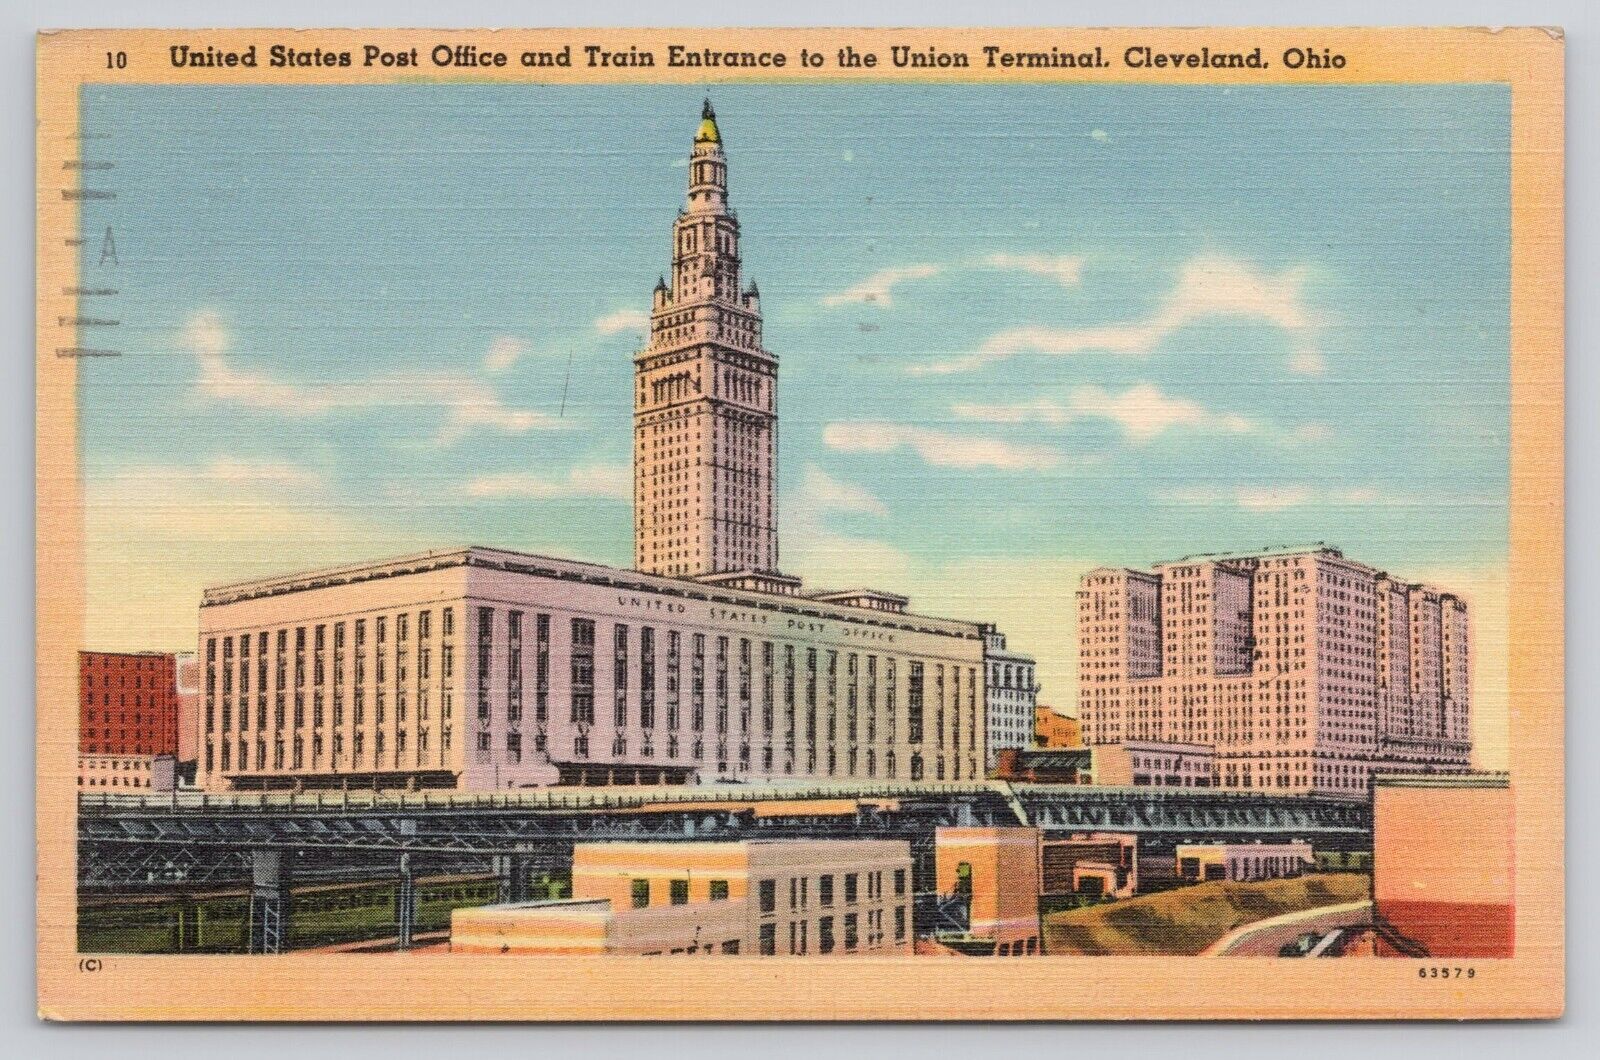 Cleveland Ohio US Post Office and Train Entrance to Union Terminal 1943 Postcard